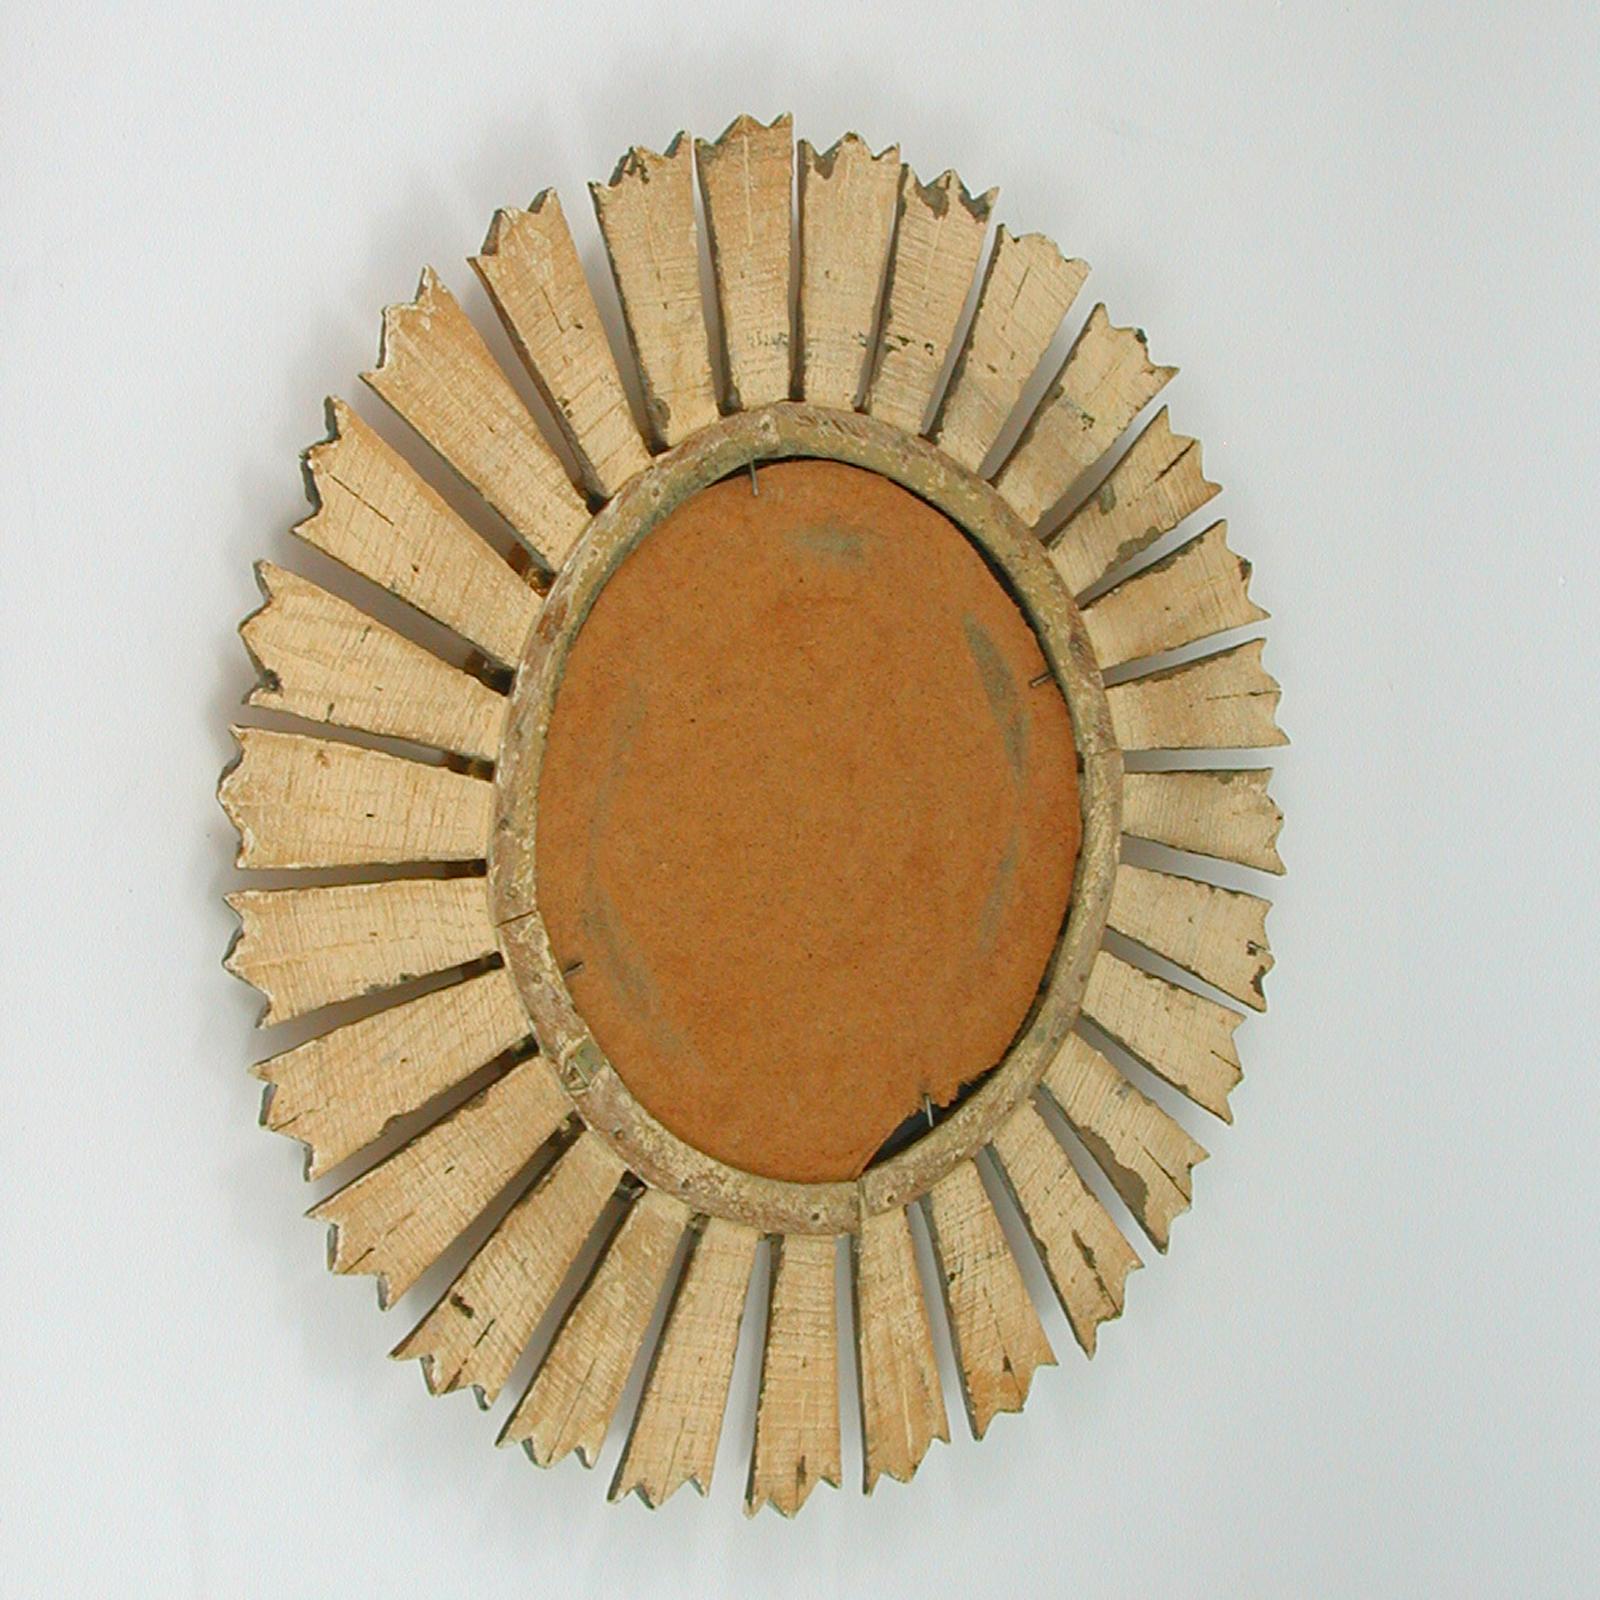 Spanish Sunburst Carved Giltwood Mirror, 1940s to 1950s For Sale 4